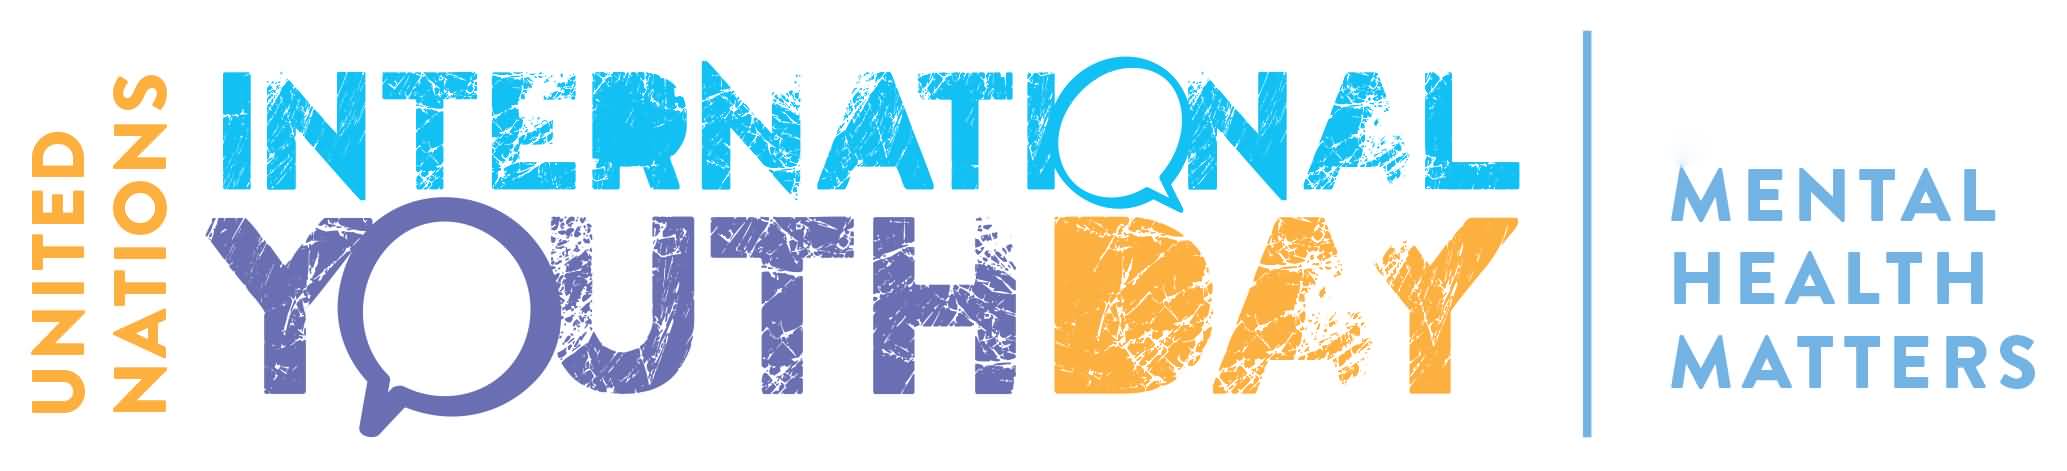 Mental Health Matters - International Youth Day Wishes